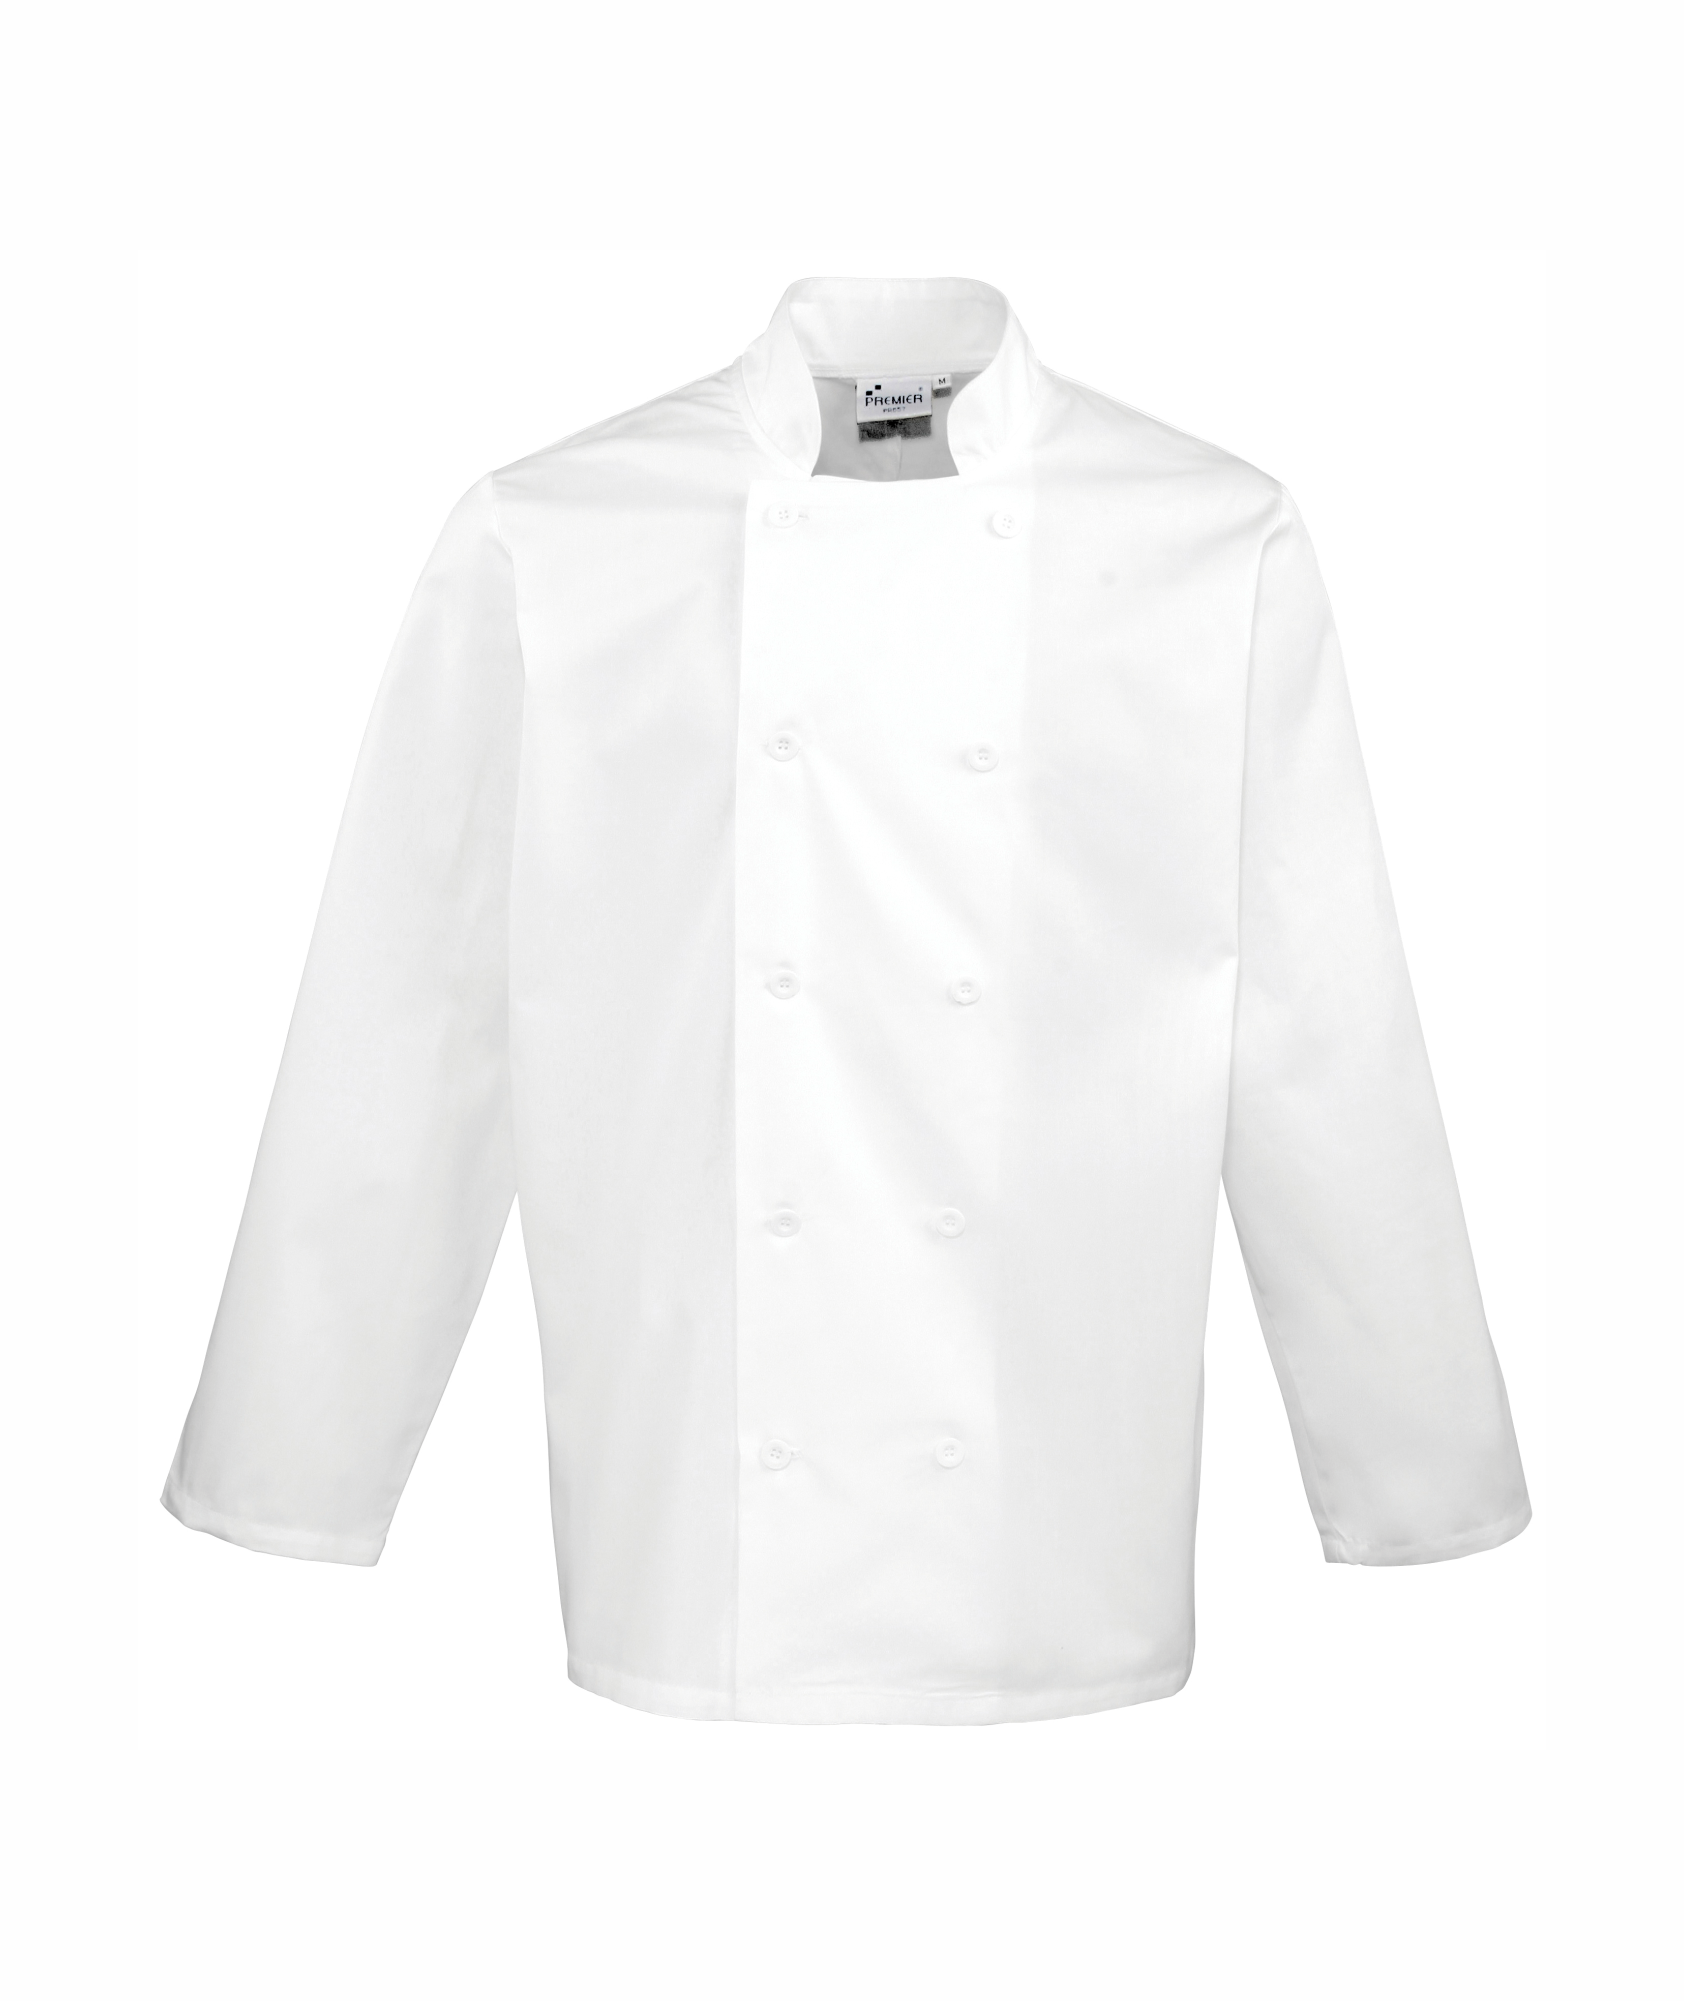 BLACK LONG sleeve Chef Jackets UK Catering Chef jacket with STUB BUTTON 